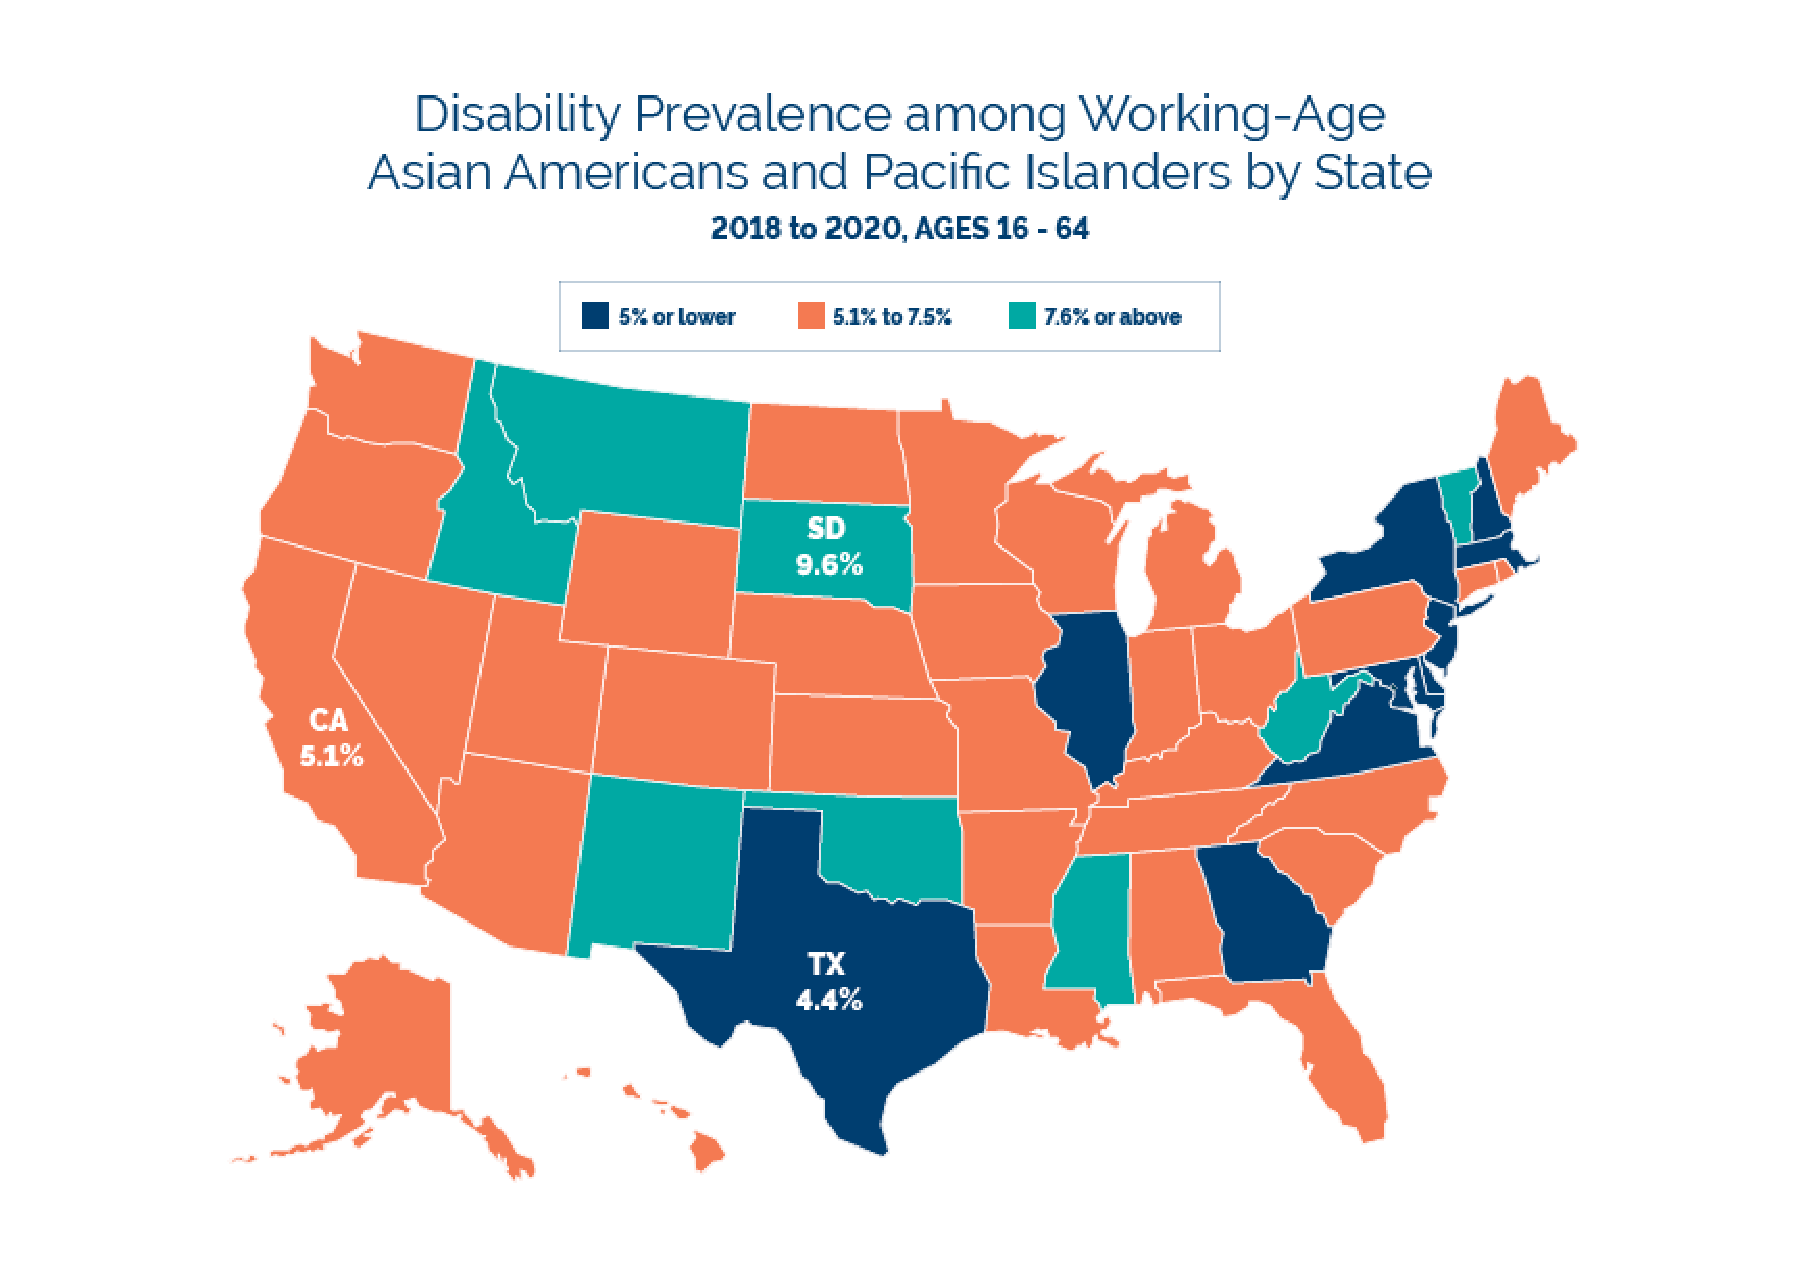 Disability Prevalence among Working-Age Asian Americans and Pacific Islanders by State 